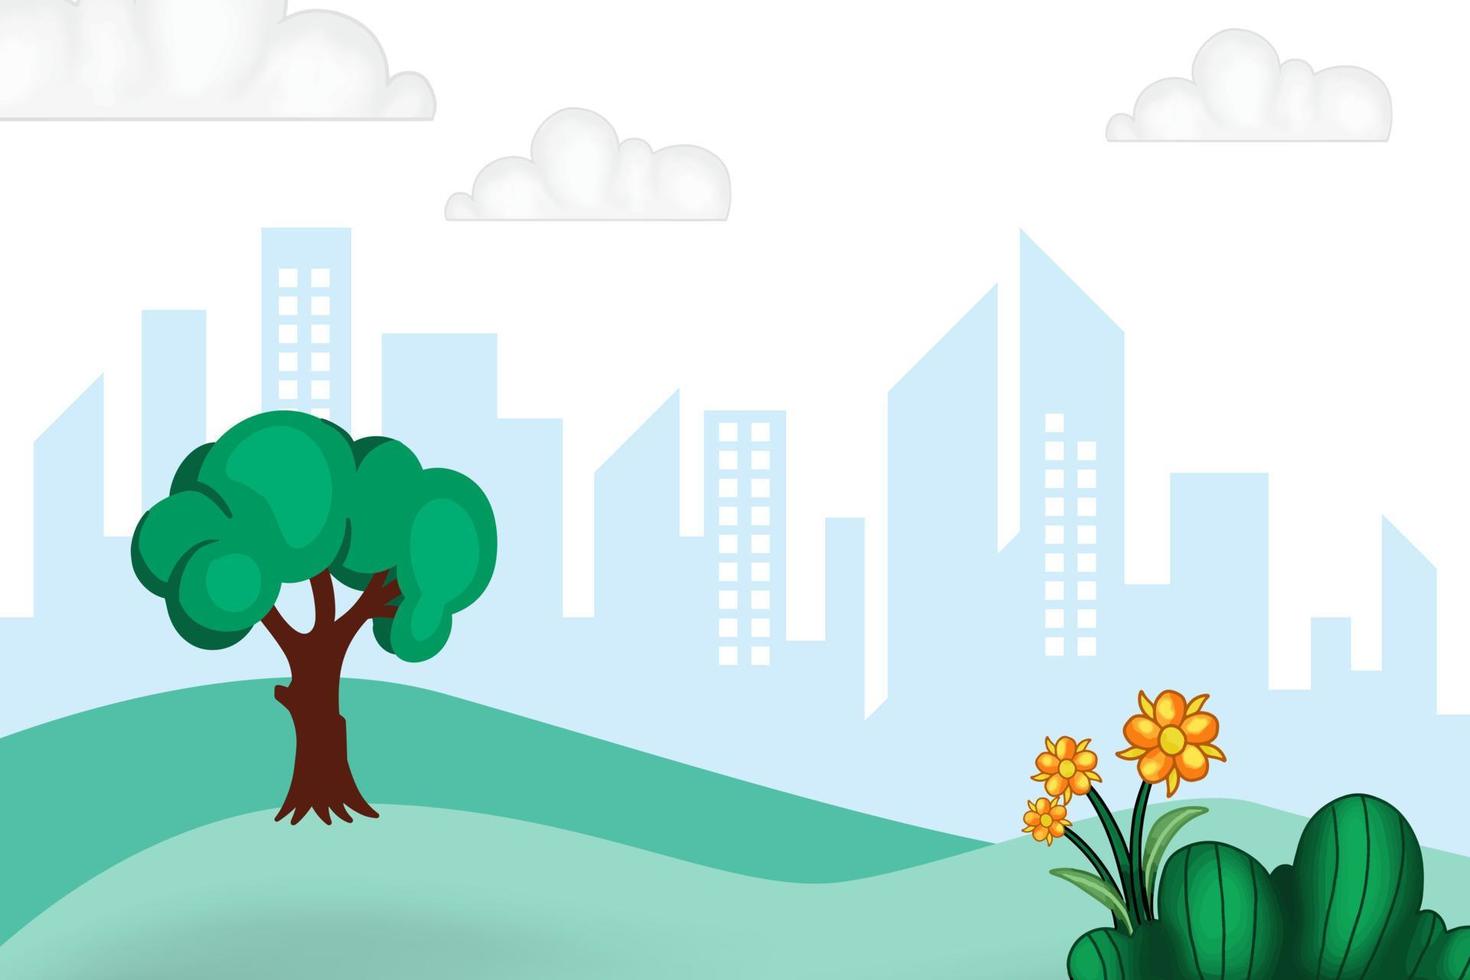 green tree illustration in a simple city park vector